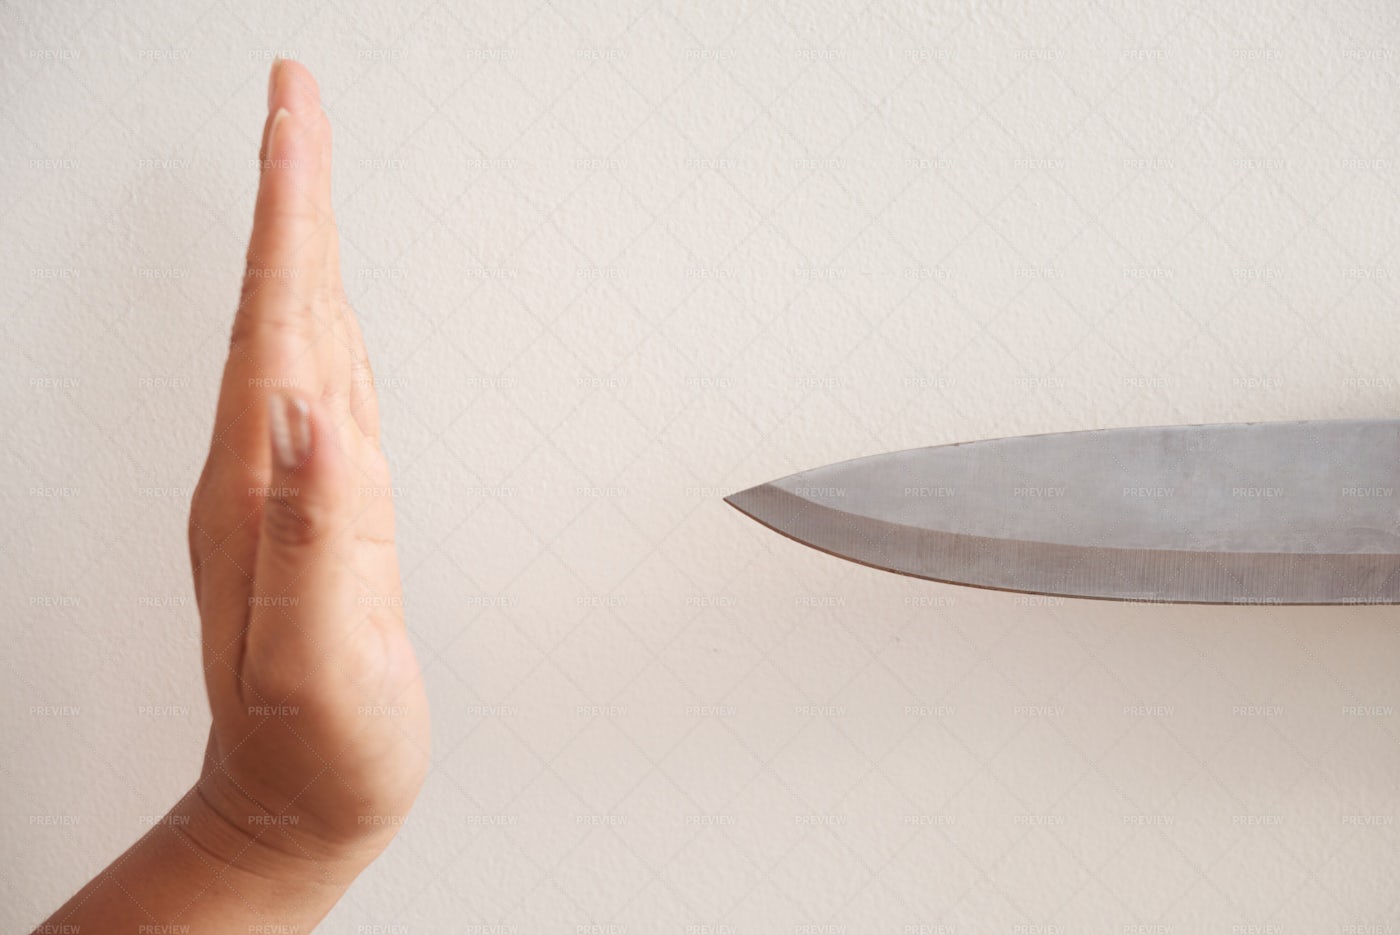 Crop Hand Stopping Knife: Stock Photos